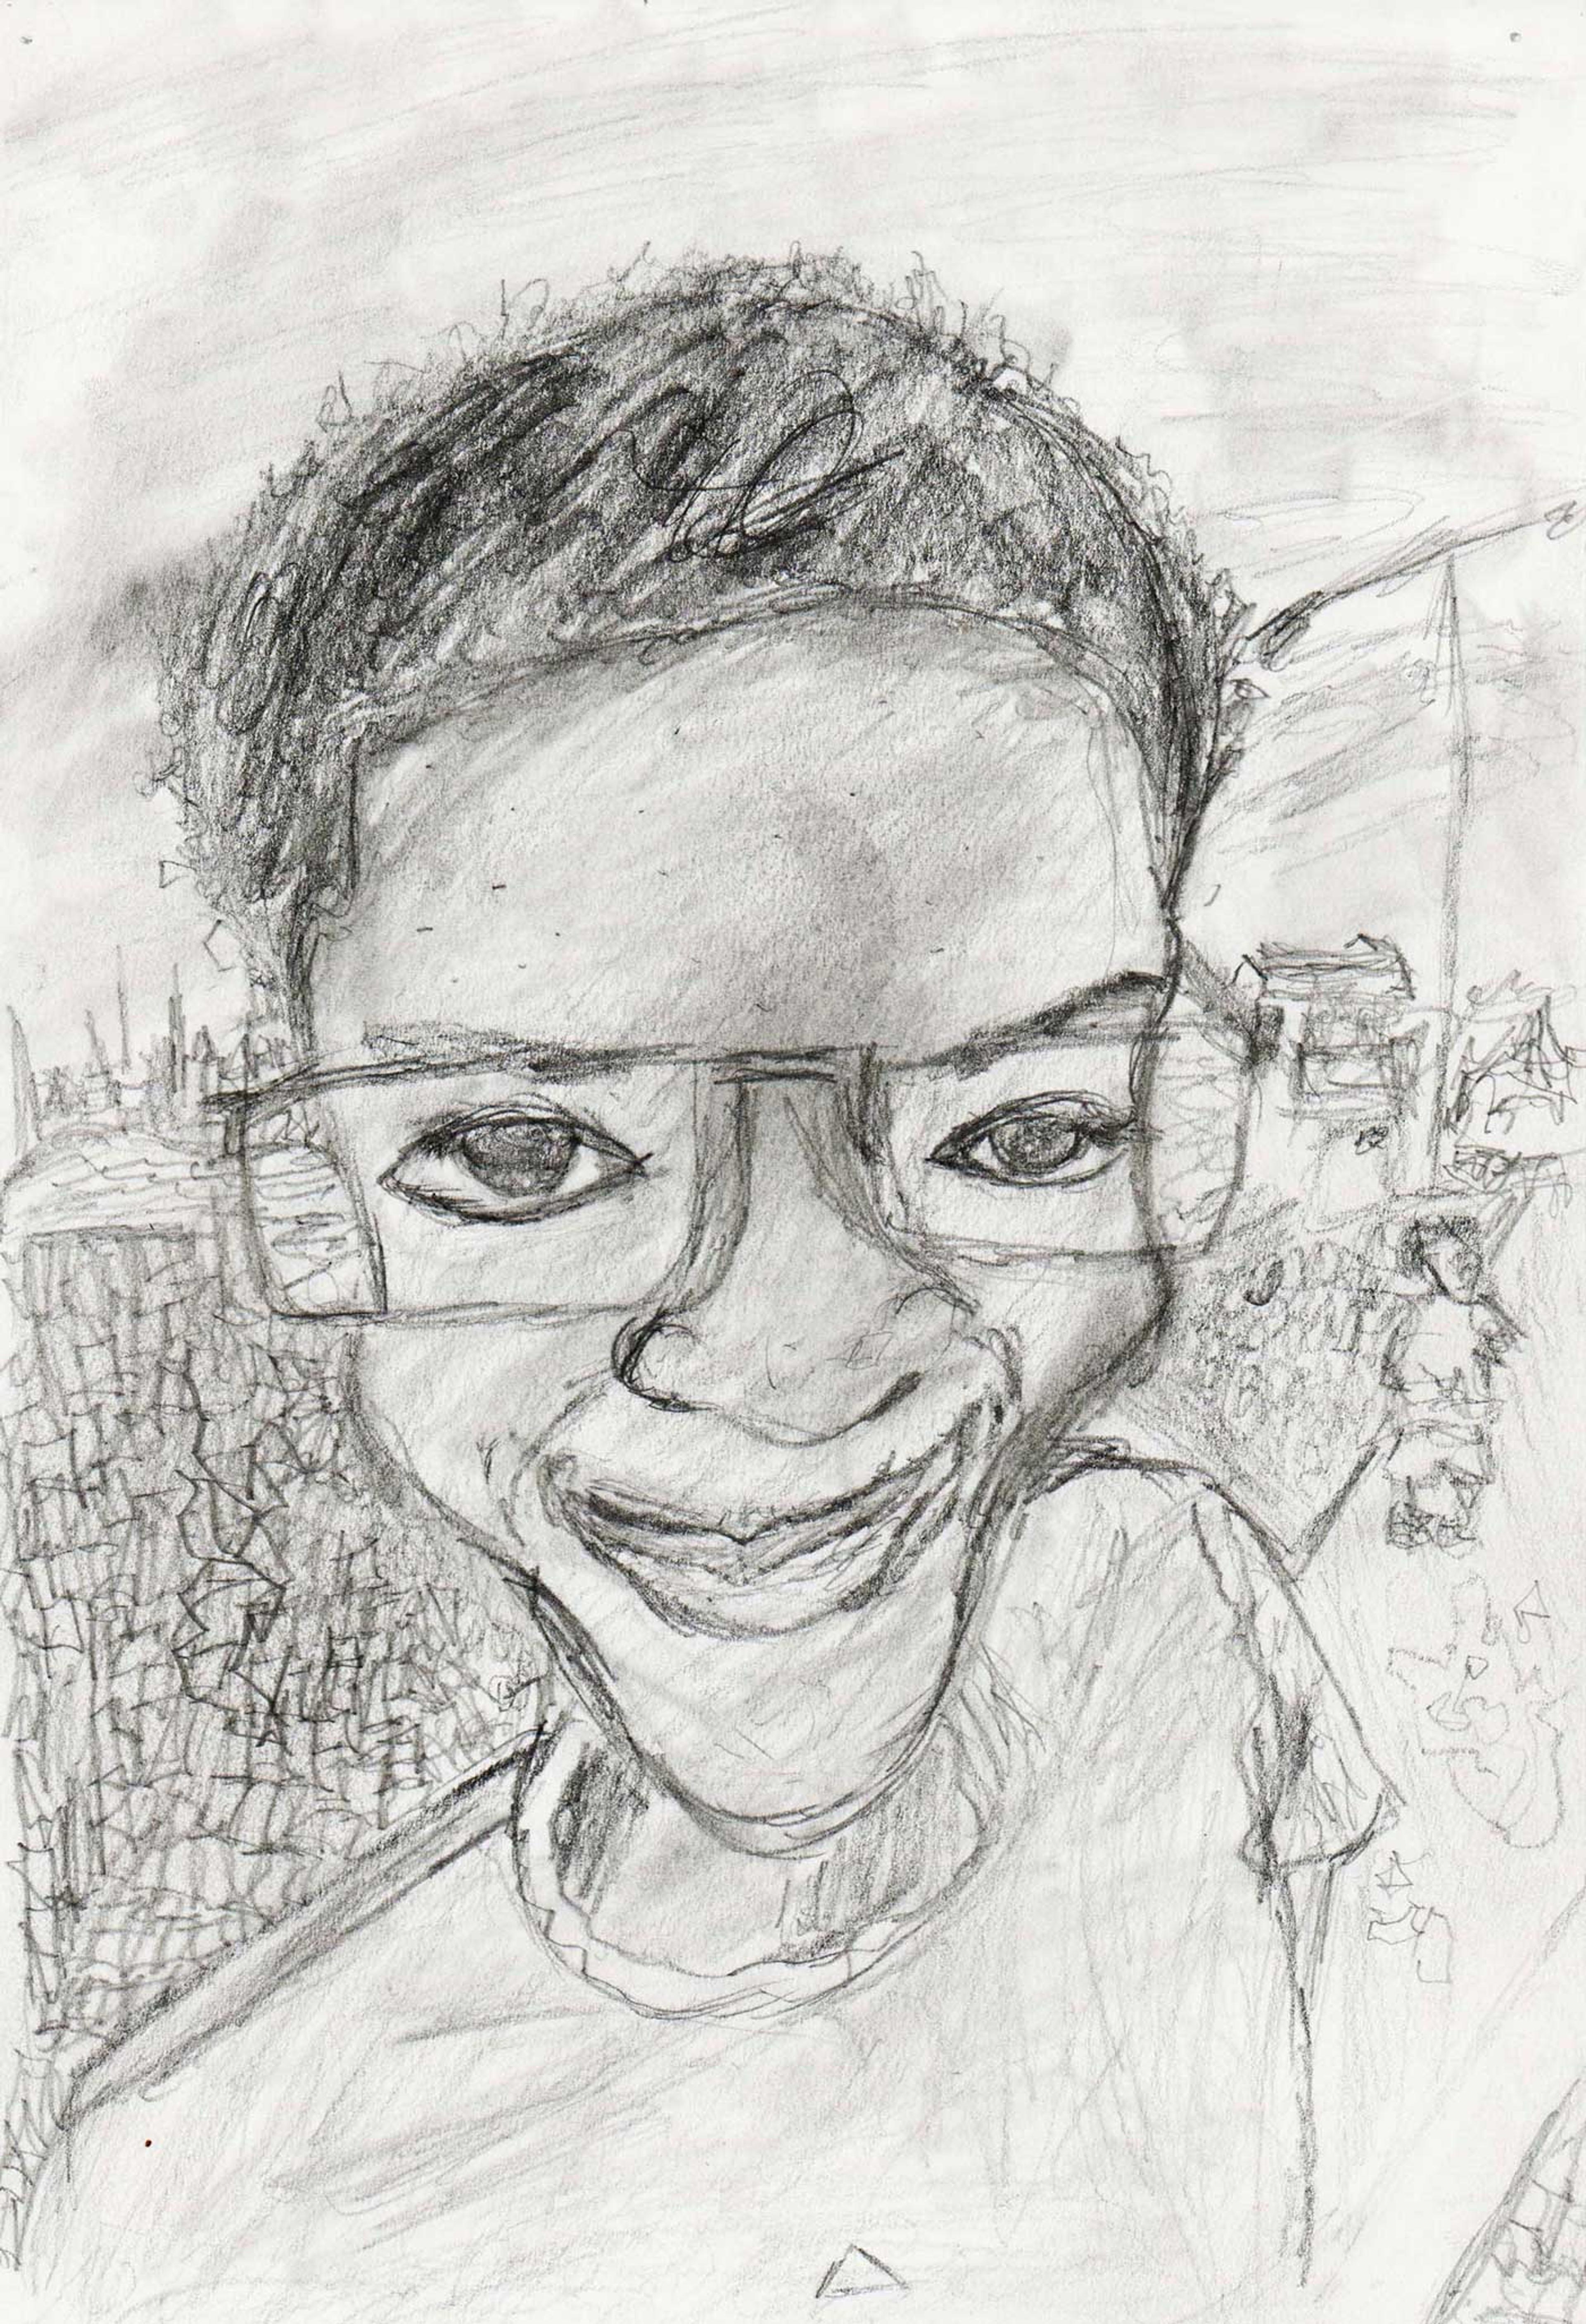 Pencil drawing of a young boy with glasses.